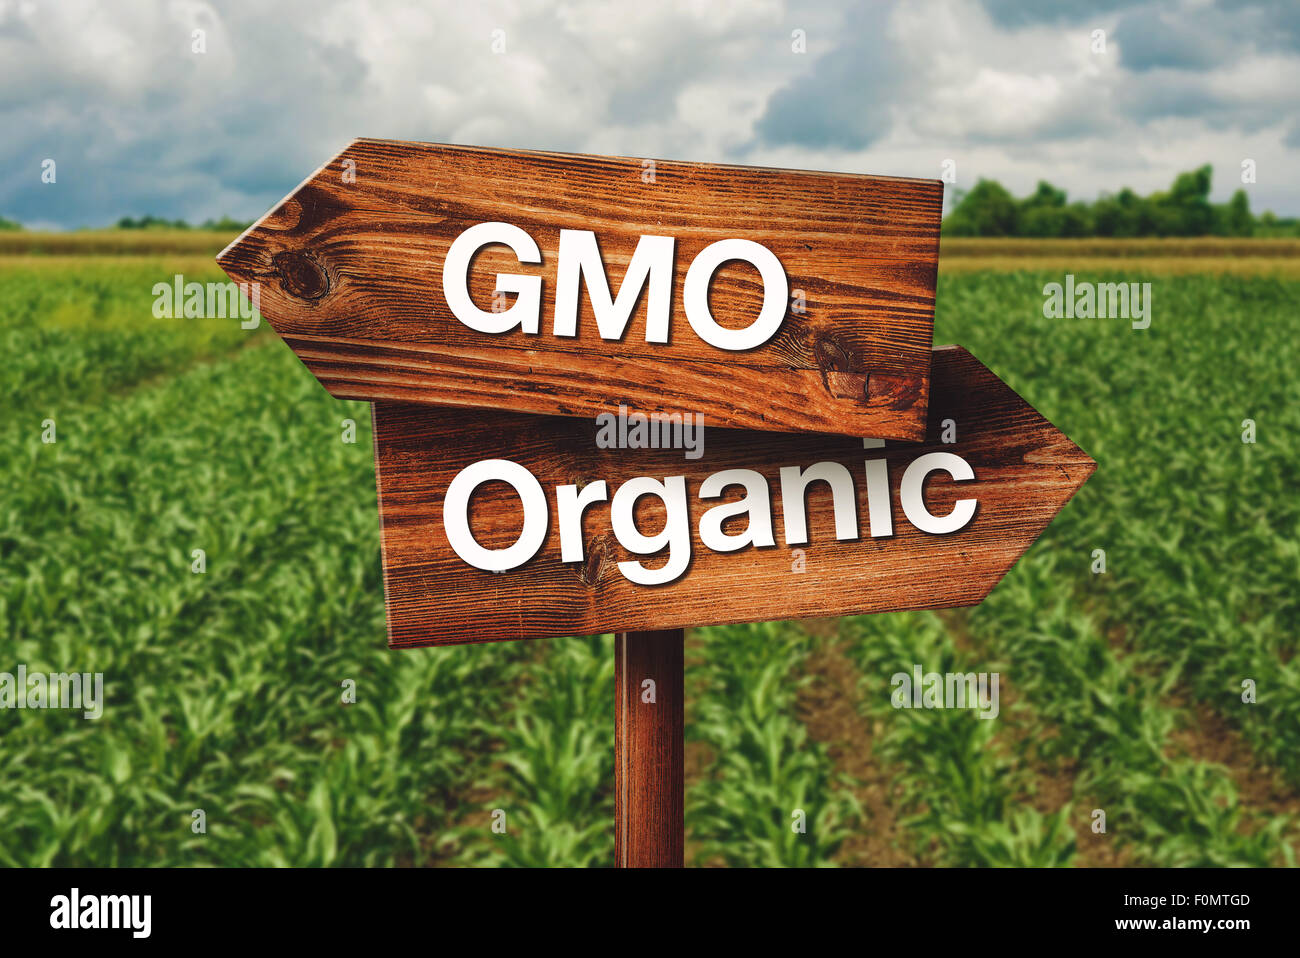 Gmo or Organic Farming Wooden Direction Sign in Agricultural Field Stock Photo